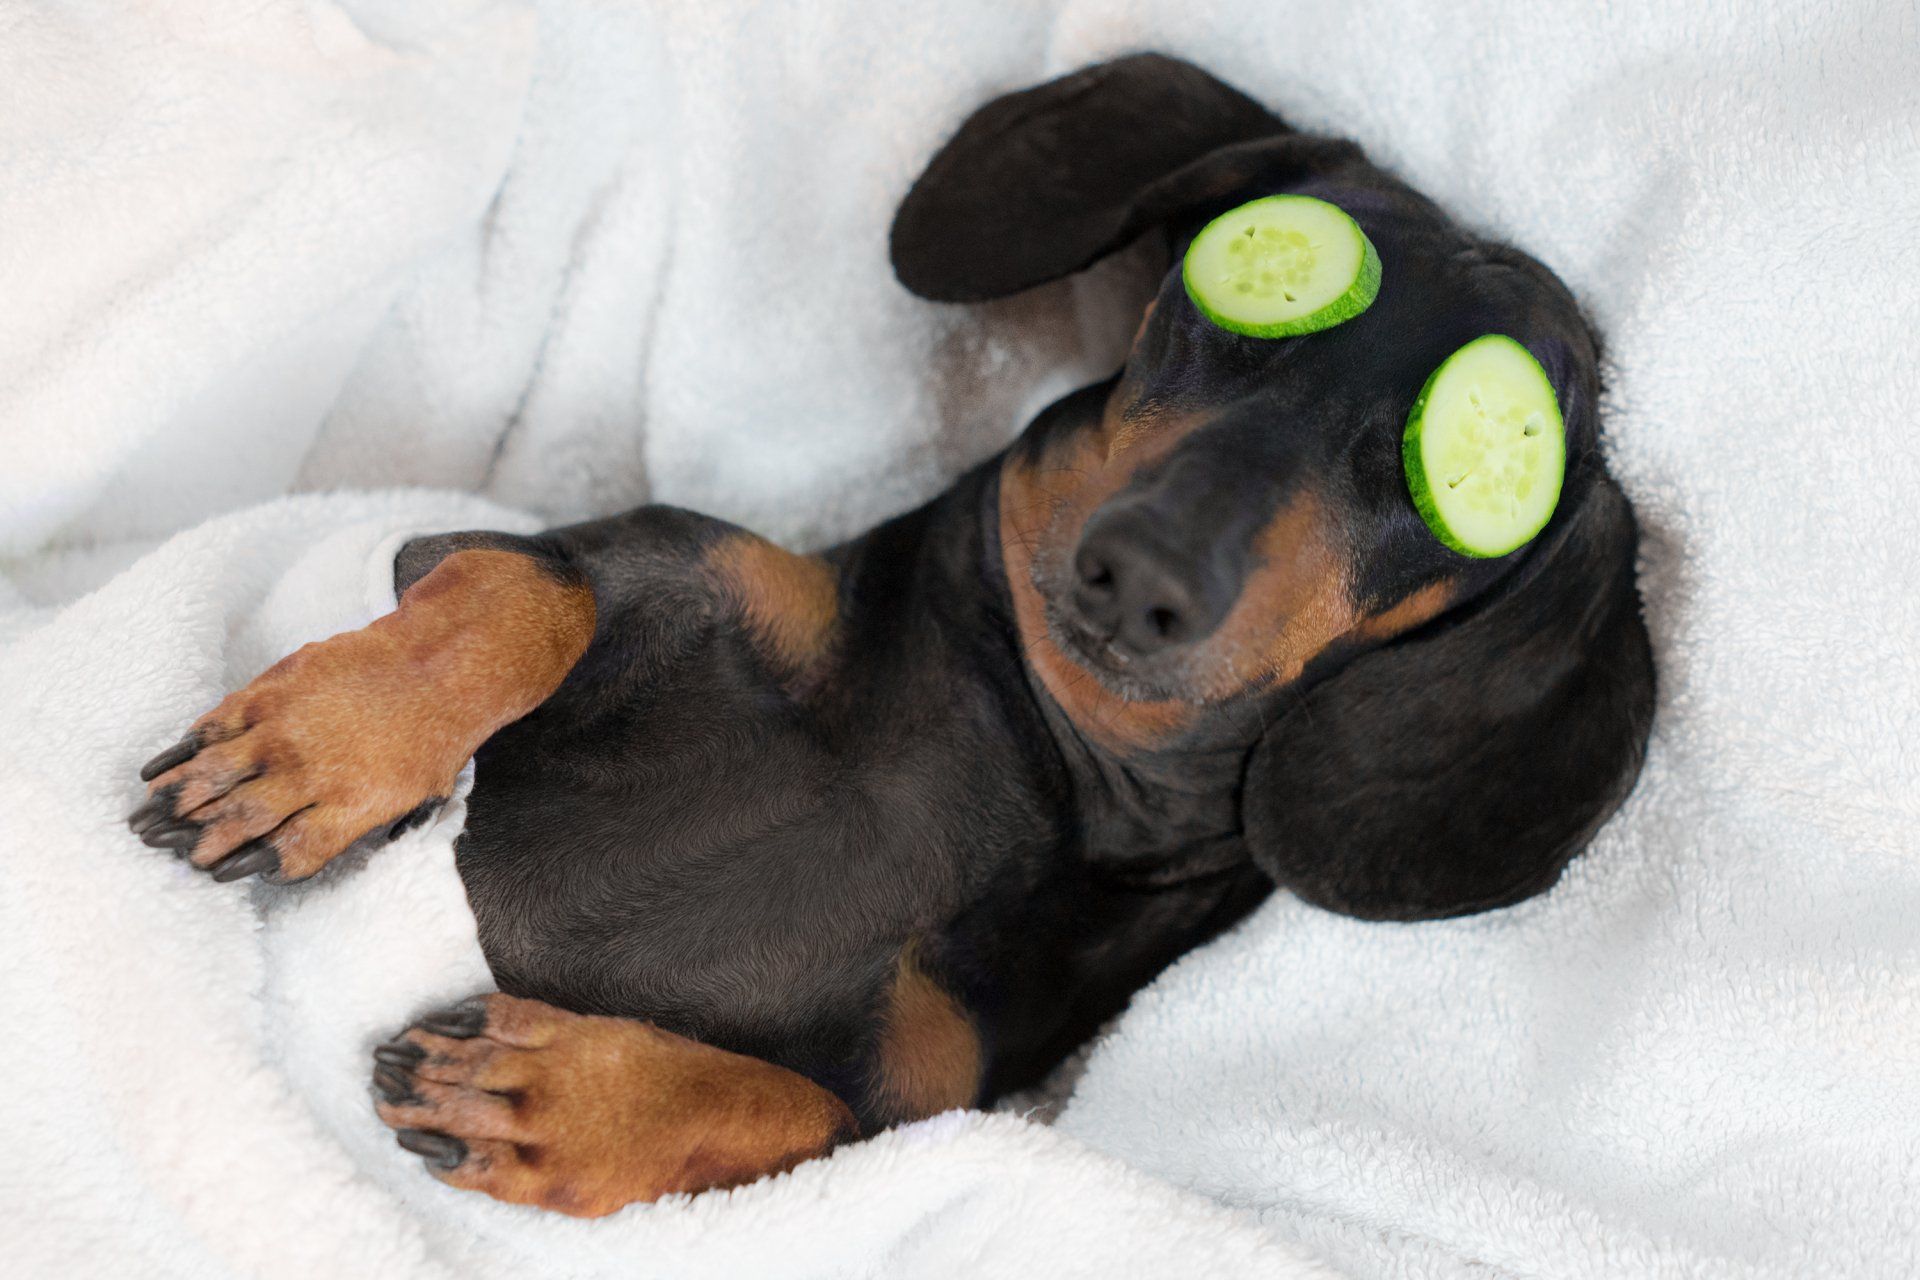 Sleeping puppy Lifestyle Habits That Fight Inflammation